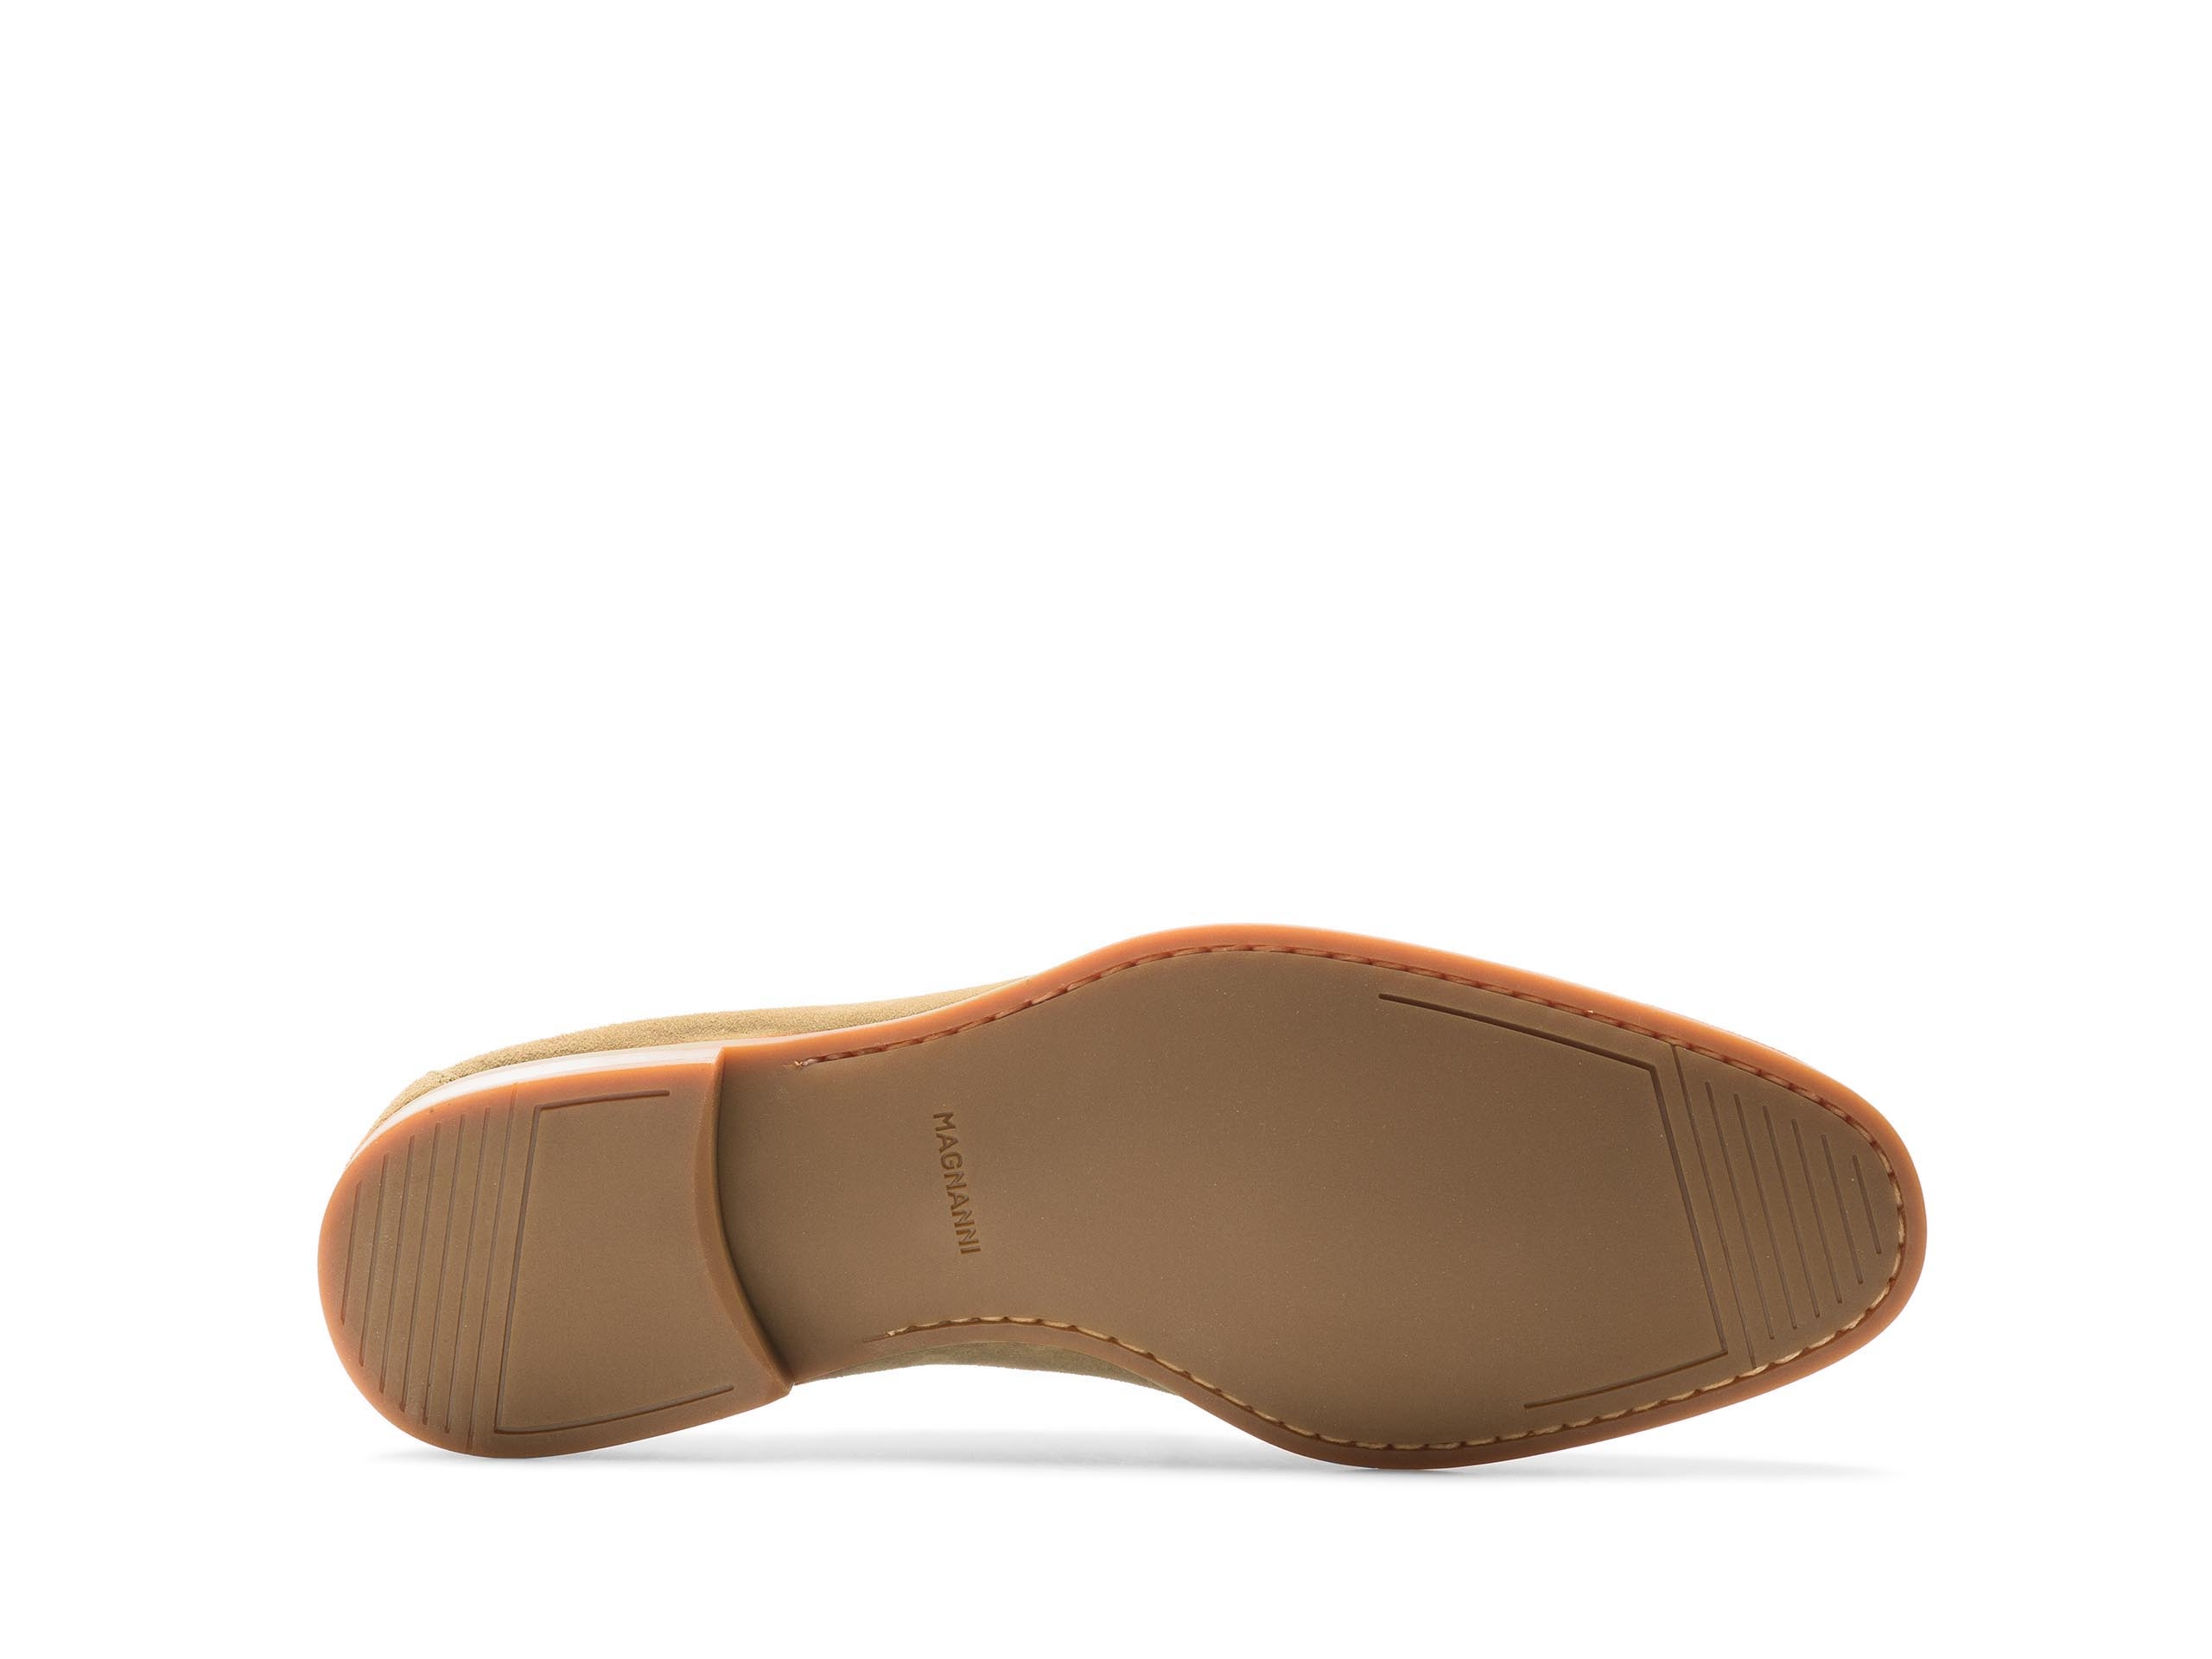 Sole of the Docio Taupe Suede